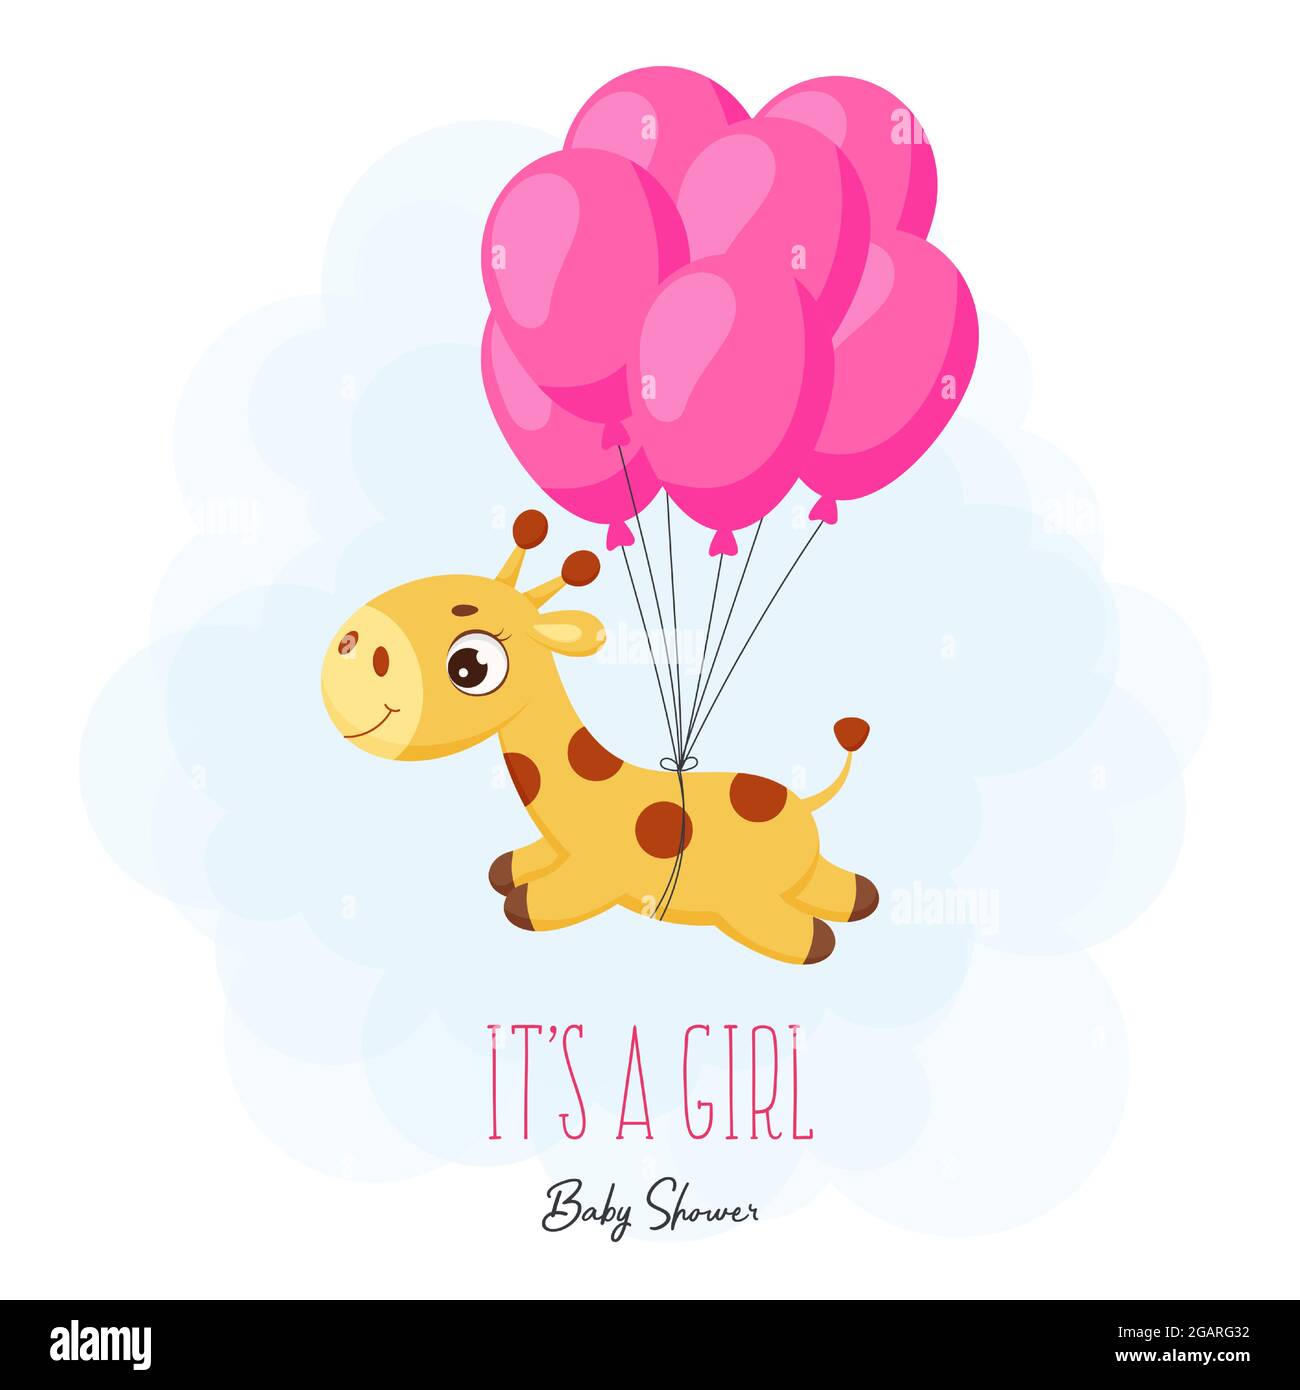 Baby Shower greeting card with cute little giraffe flying on pink balloons.  Funny magic unicorn cartoon character with phrase 